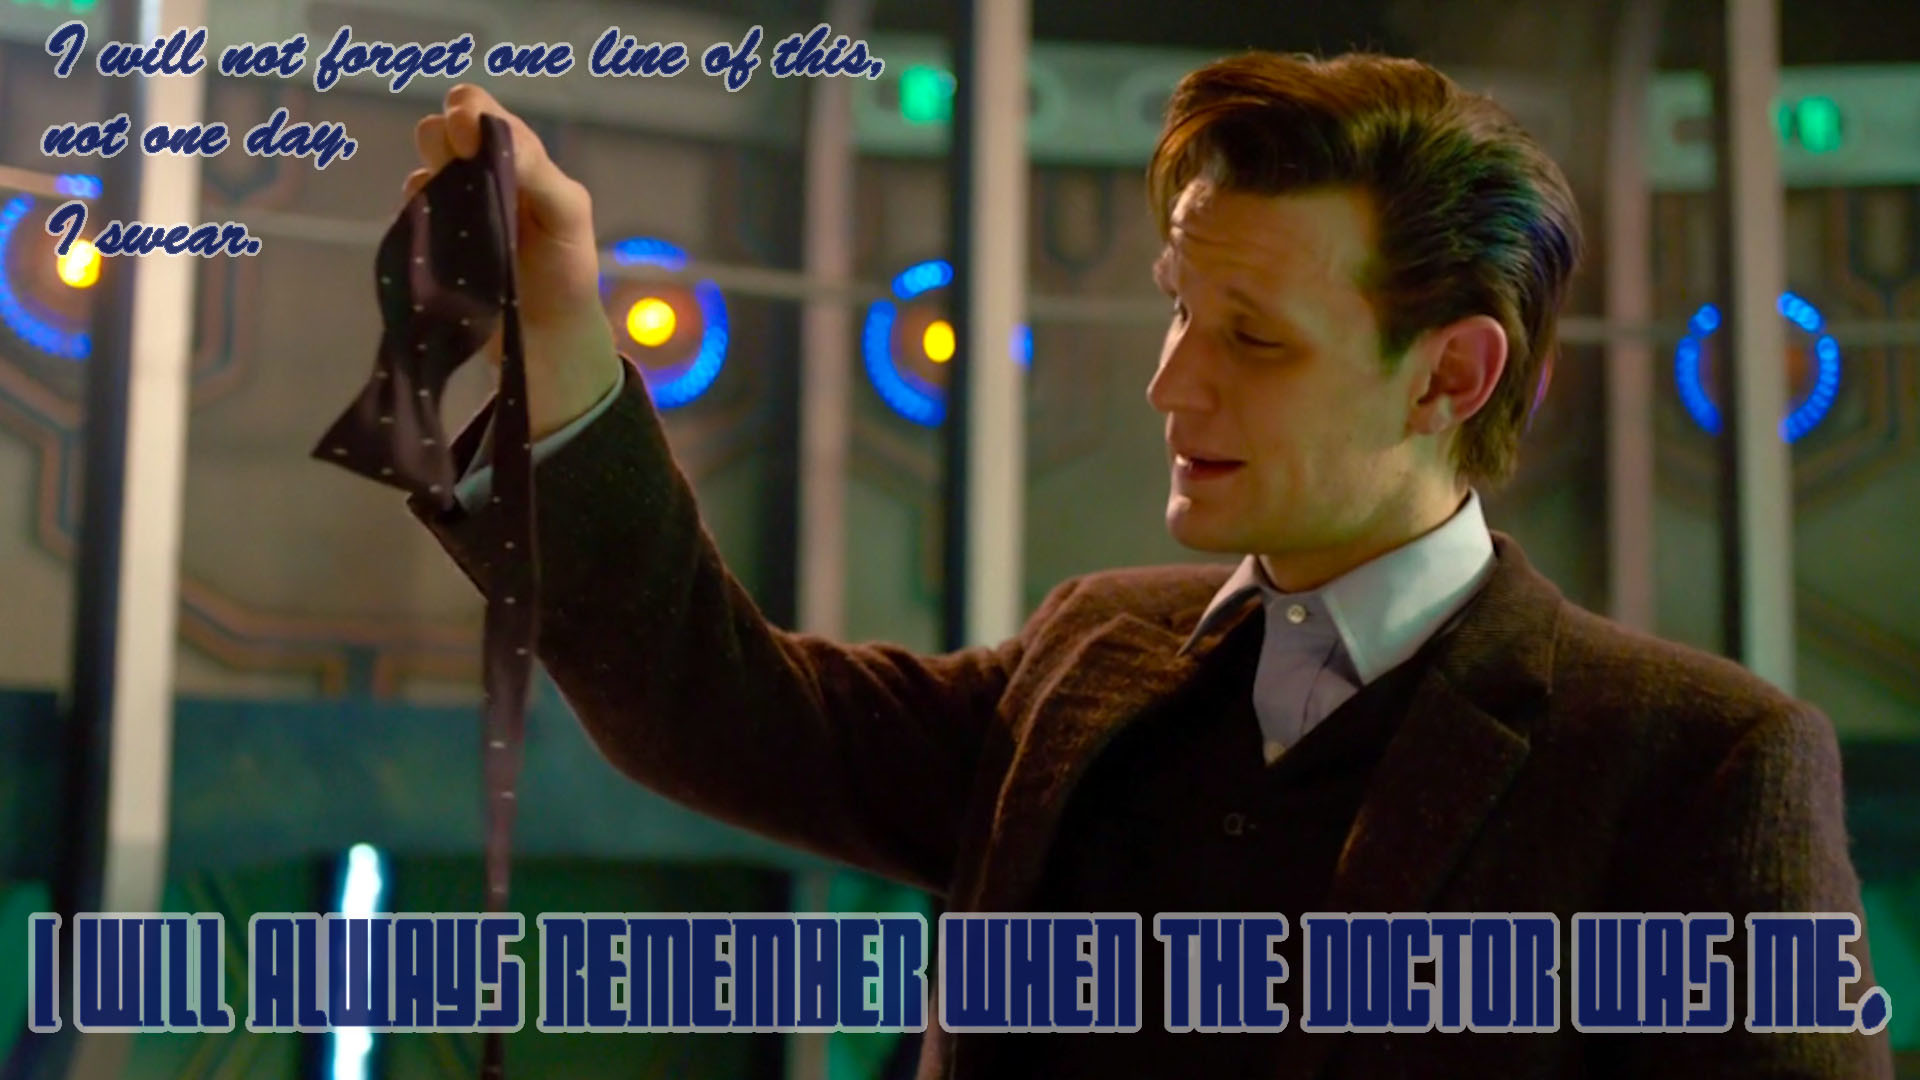 1920x1080 Doctor Who Wallpaper of Matt Smith with show quote 